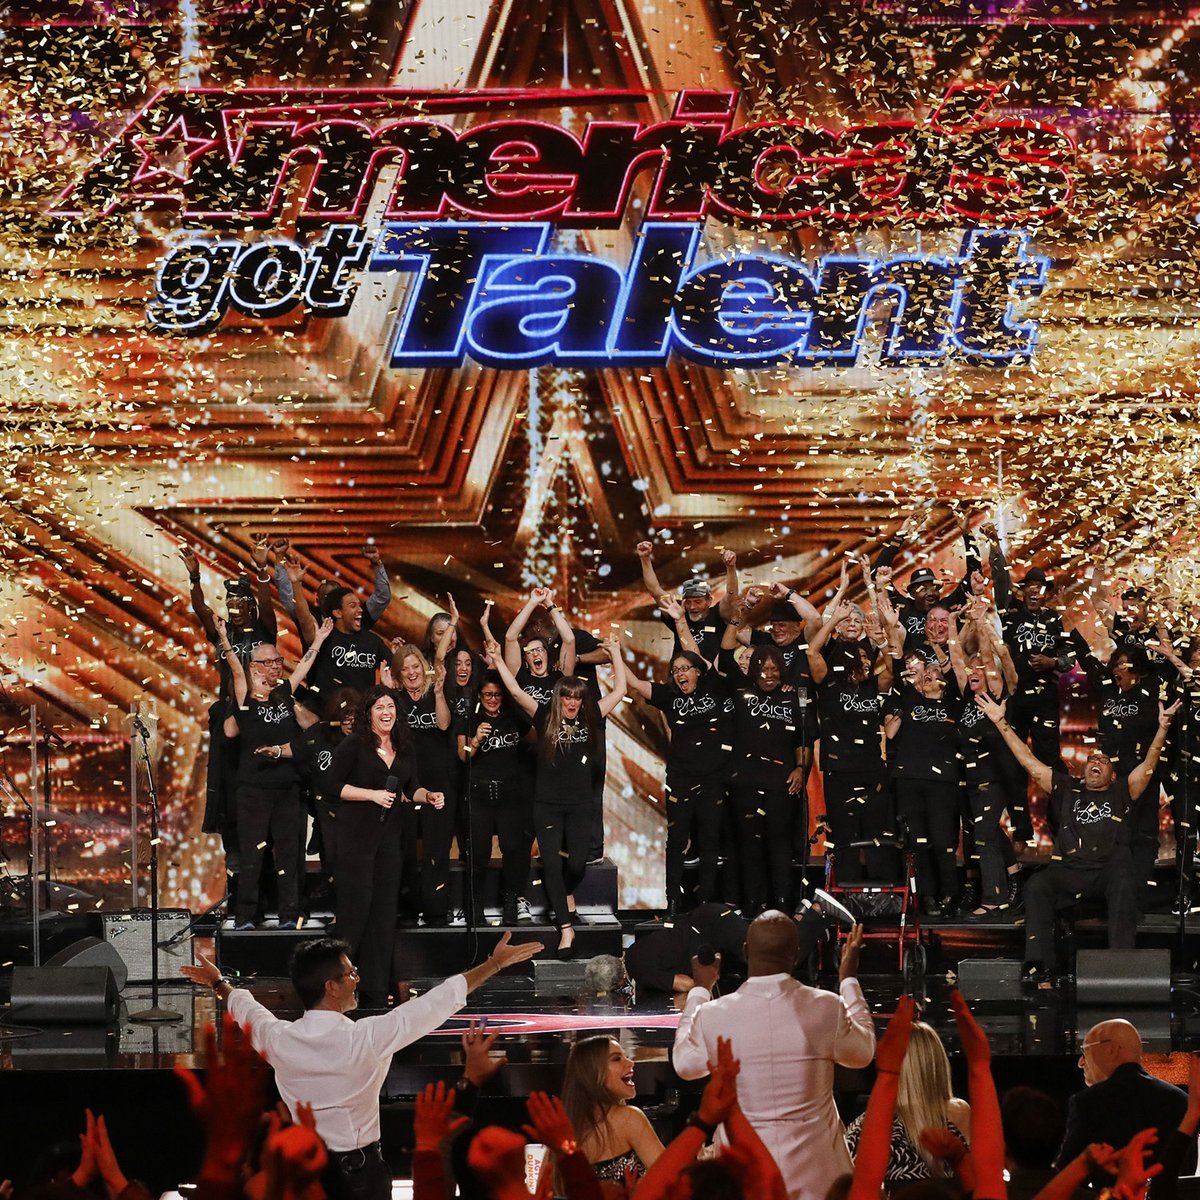 Catch this incredible AGT Golden Buzzer moment RIGHT NOW on WPTV